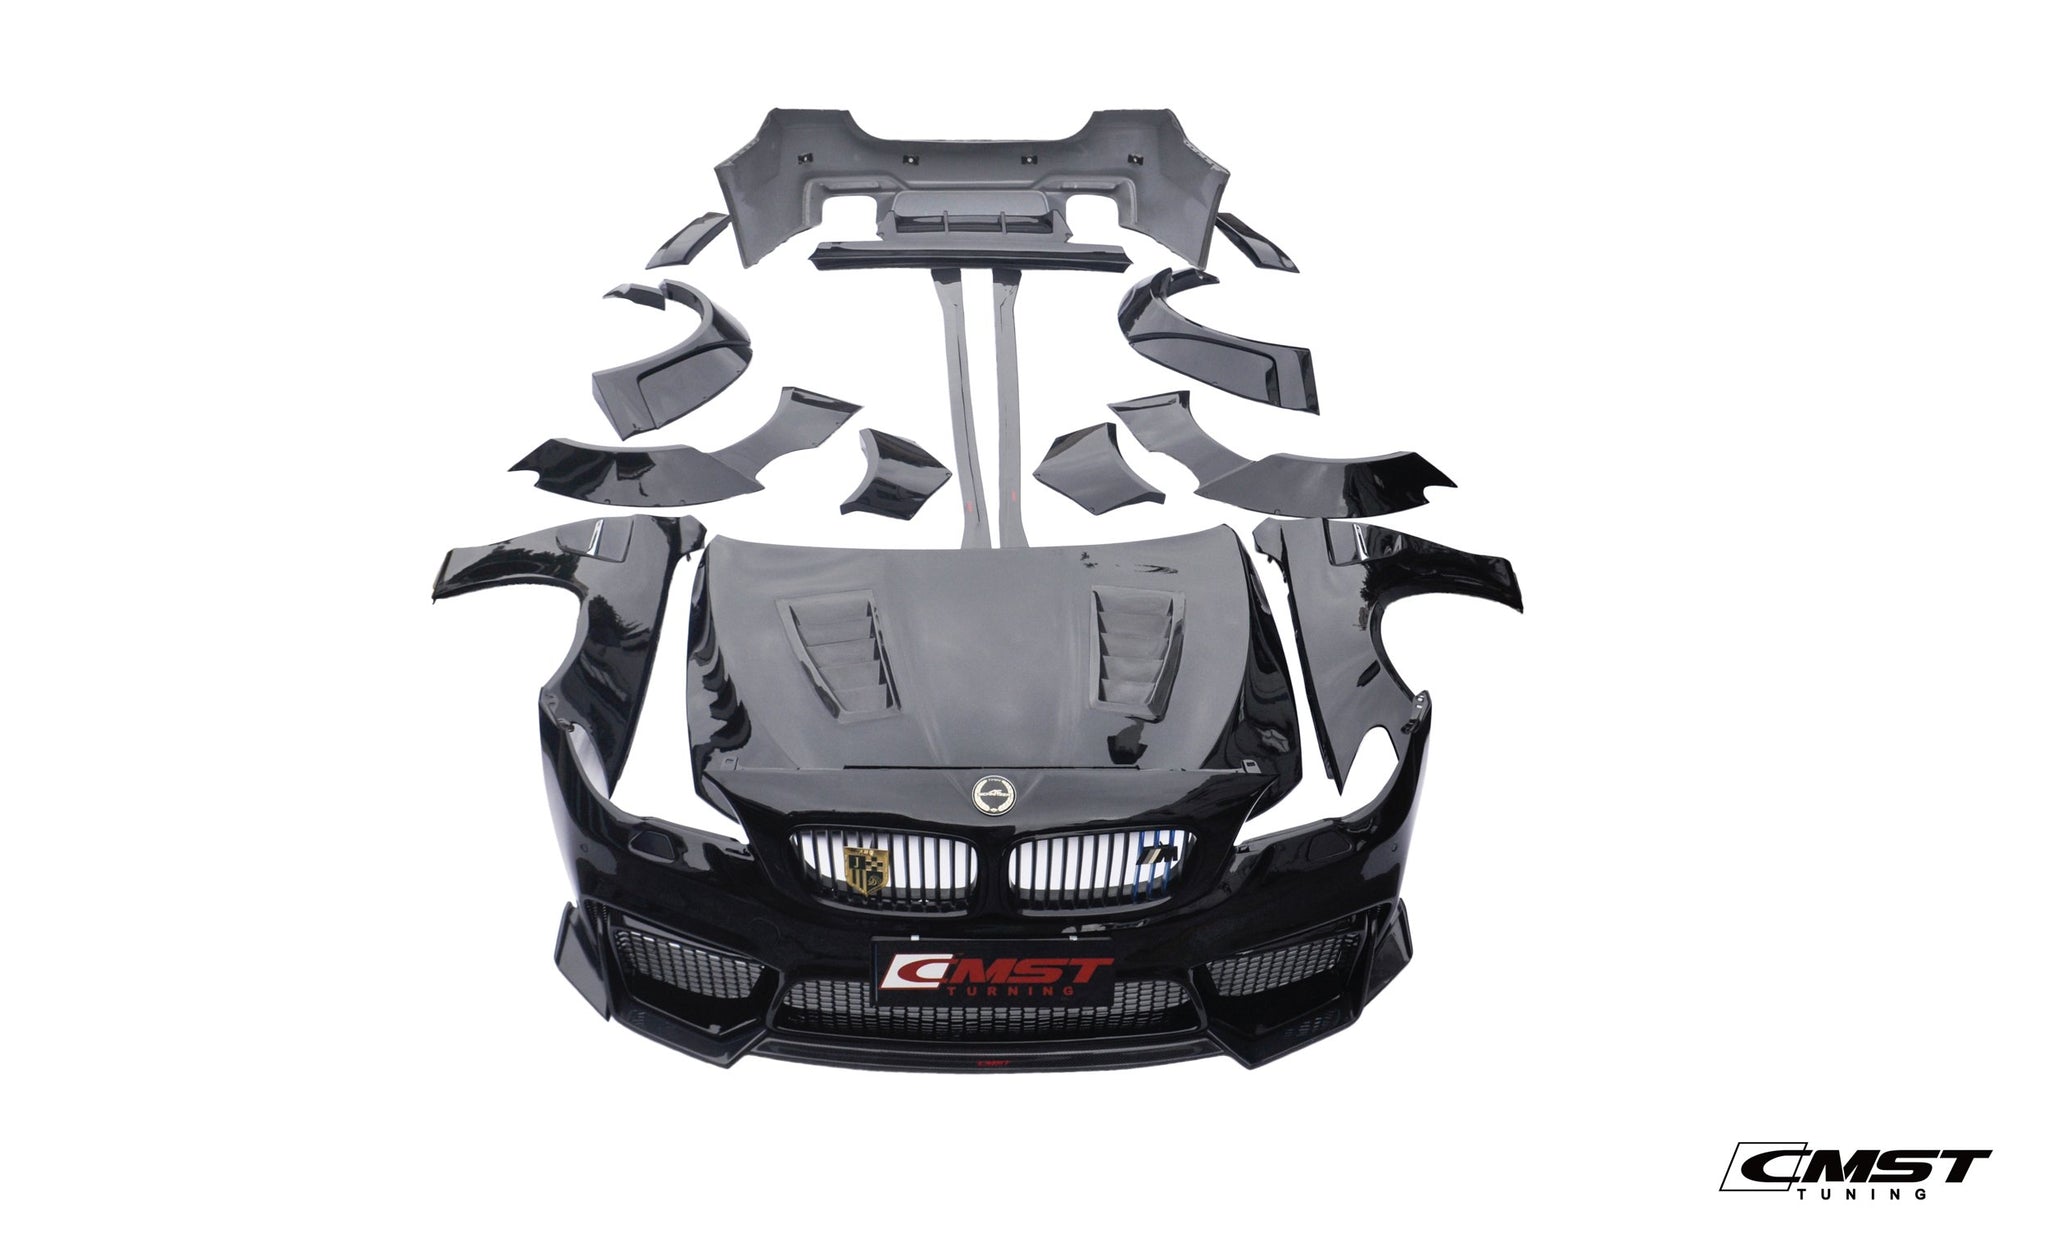 Check our price and buy CMST Carbon Fiber Body Kit set for BMW 5 Series F10/F18!